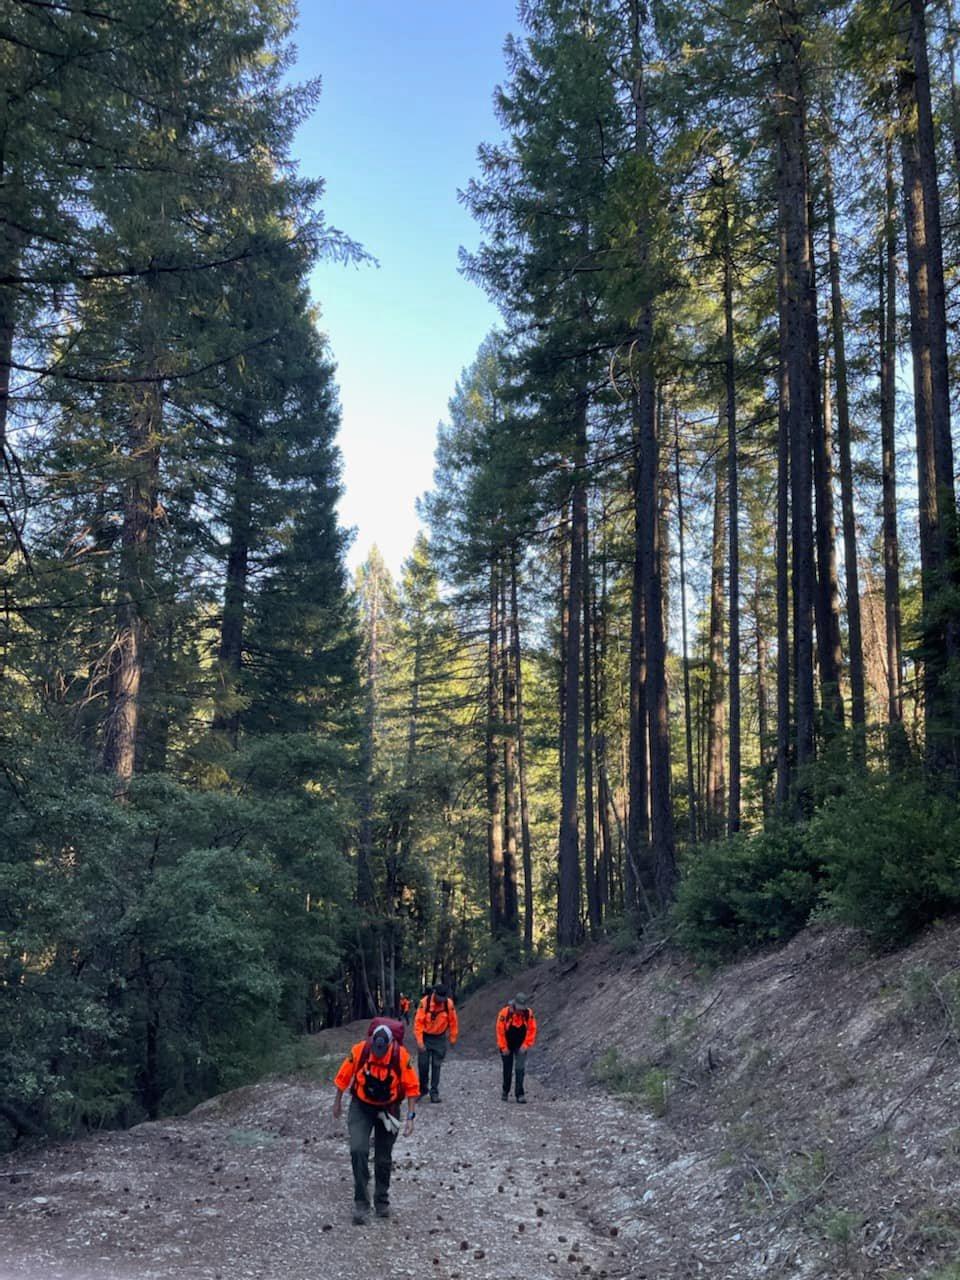 (Courtesy of <a href="https://www.facebook.com/NCSSAR/">Nevada County Sheriff's Search & Rescue</a>)